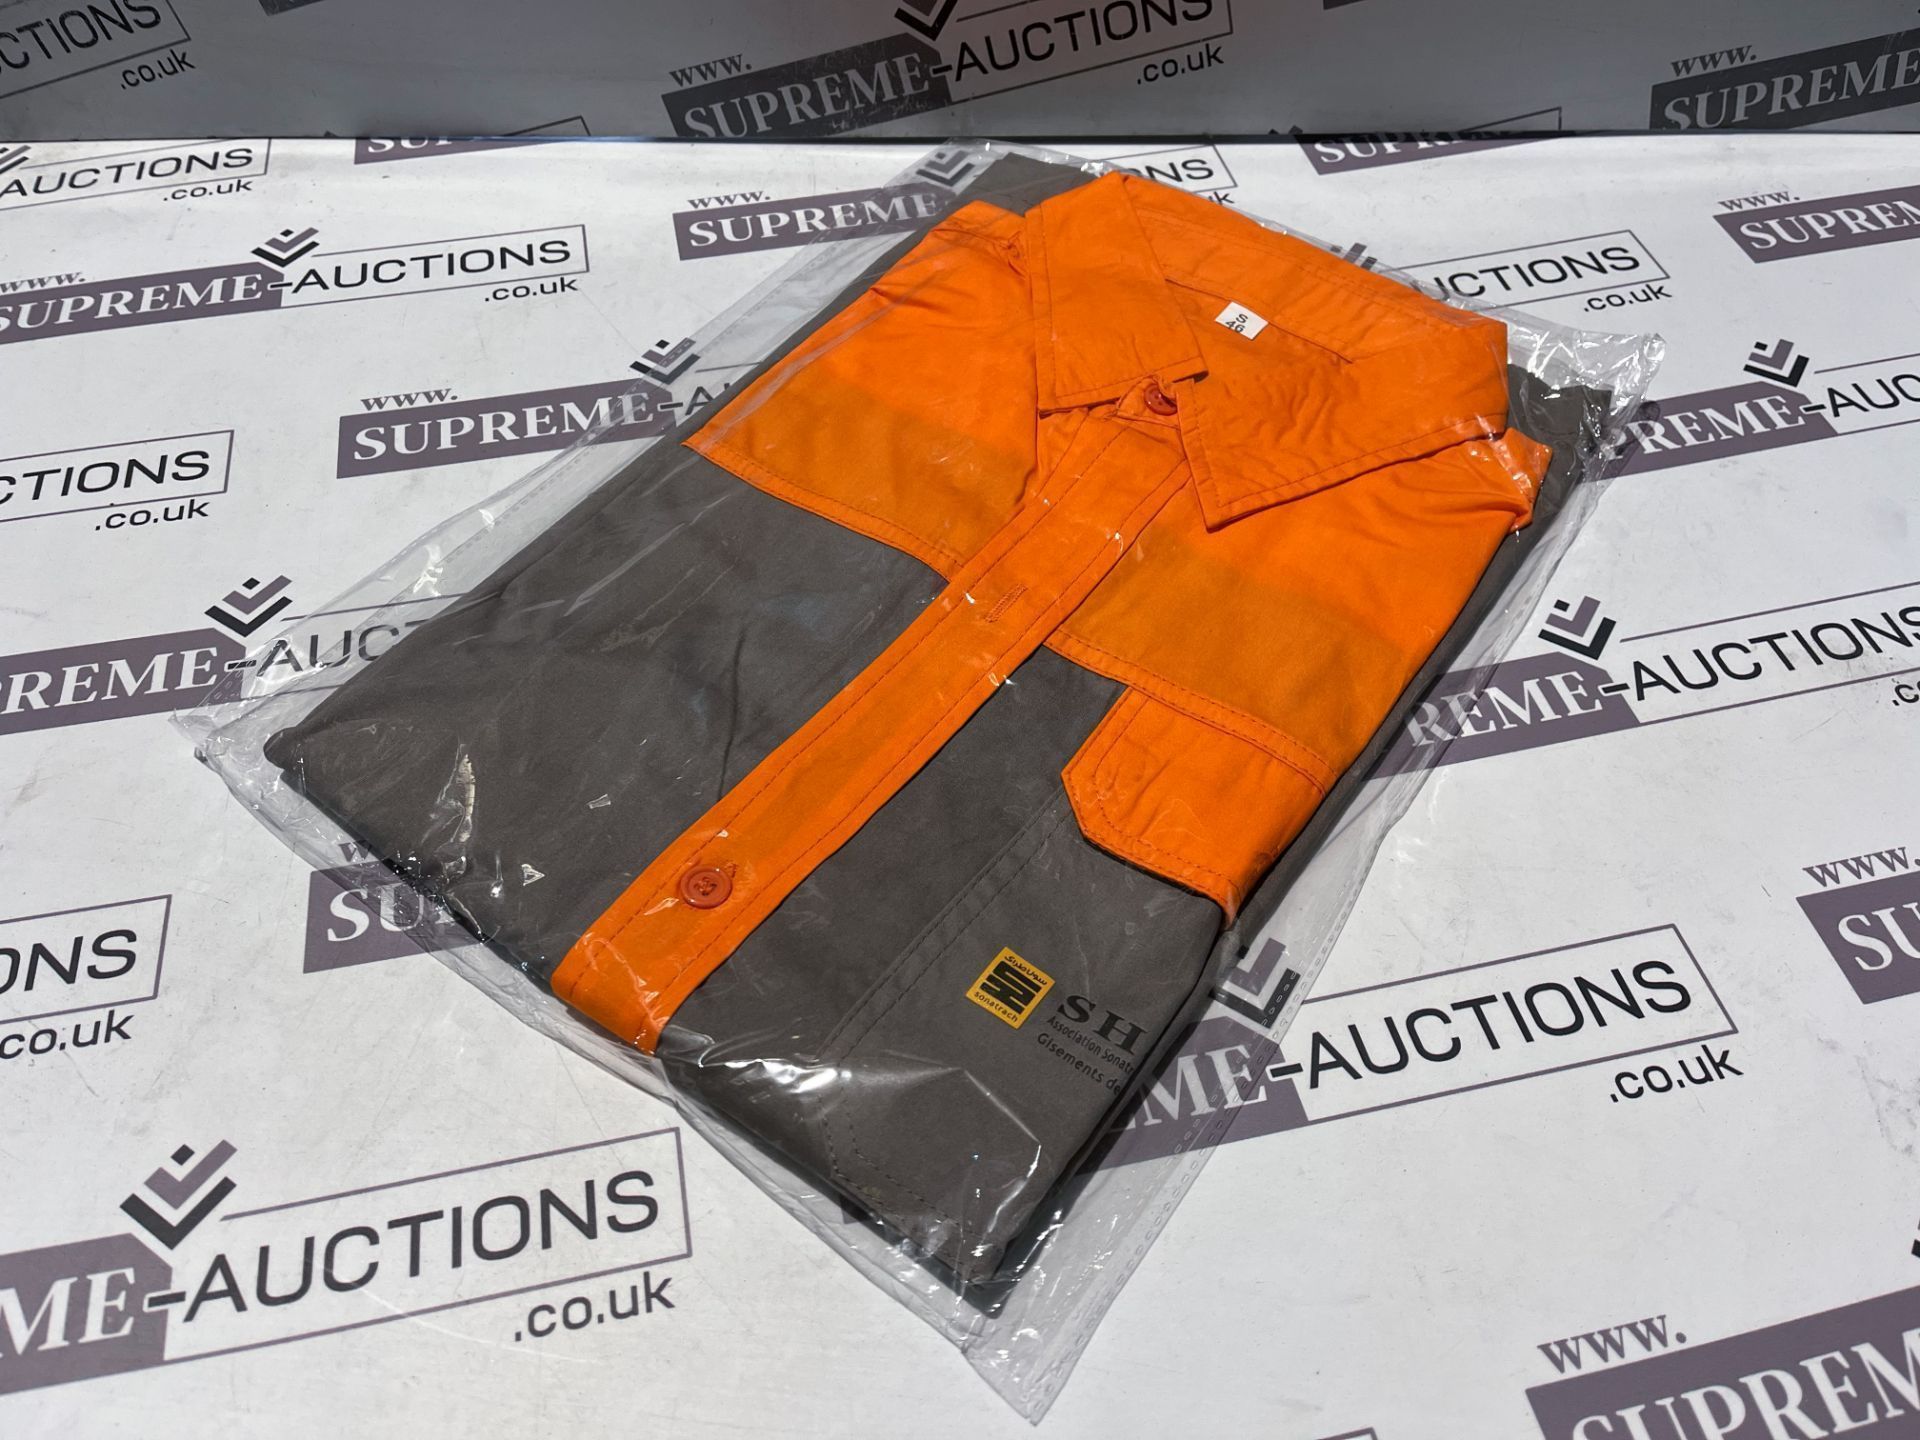 50 X BRAND NEW PROFESSIONAL WORK SUMMER SHIRTS/JACKETS (SIZES MAY VARY) R5-6